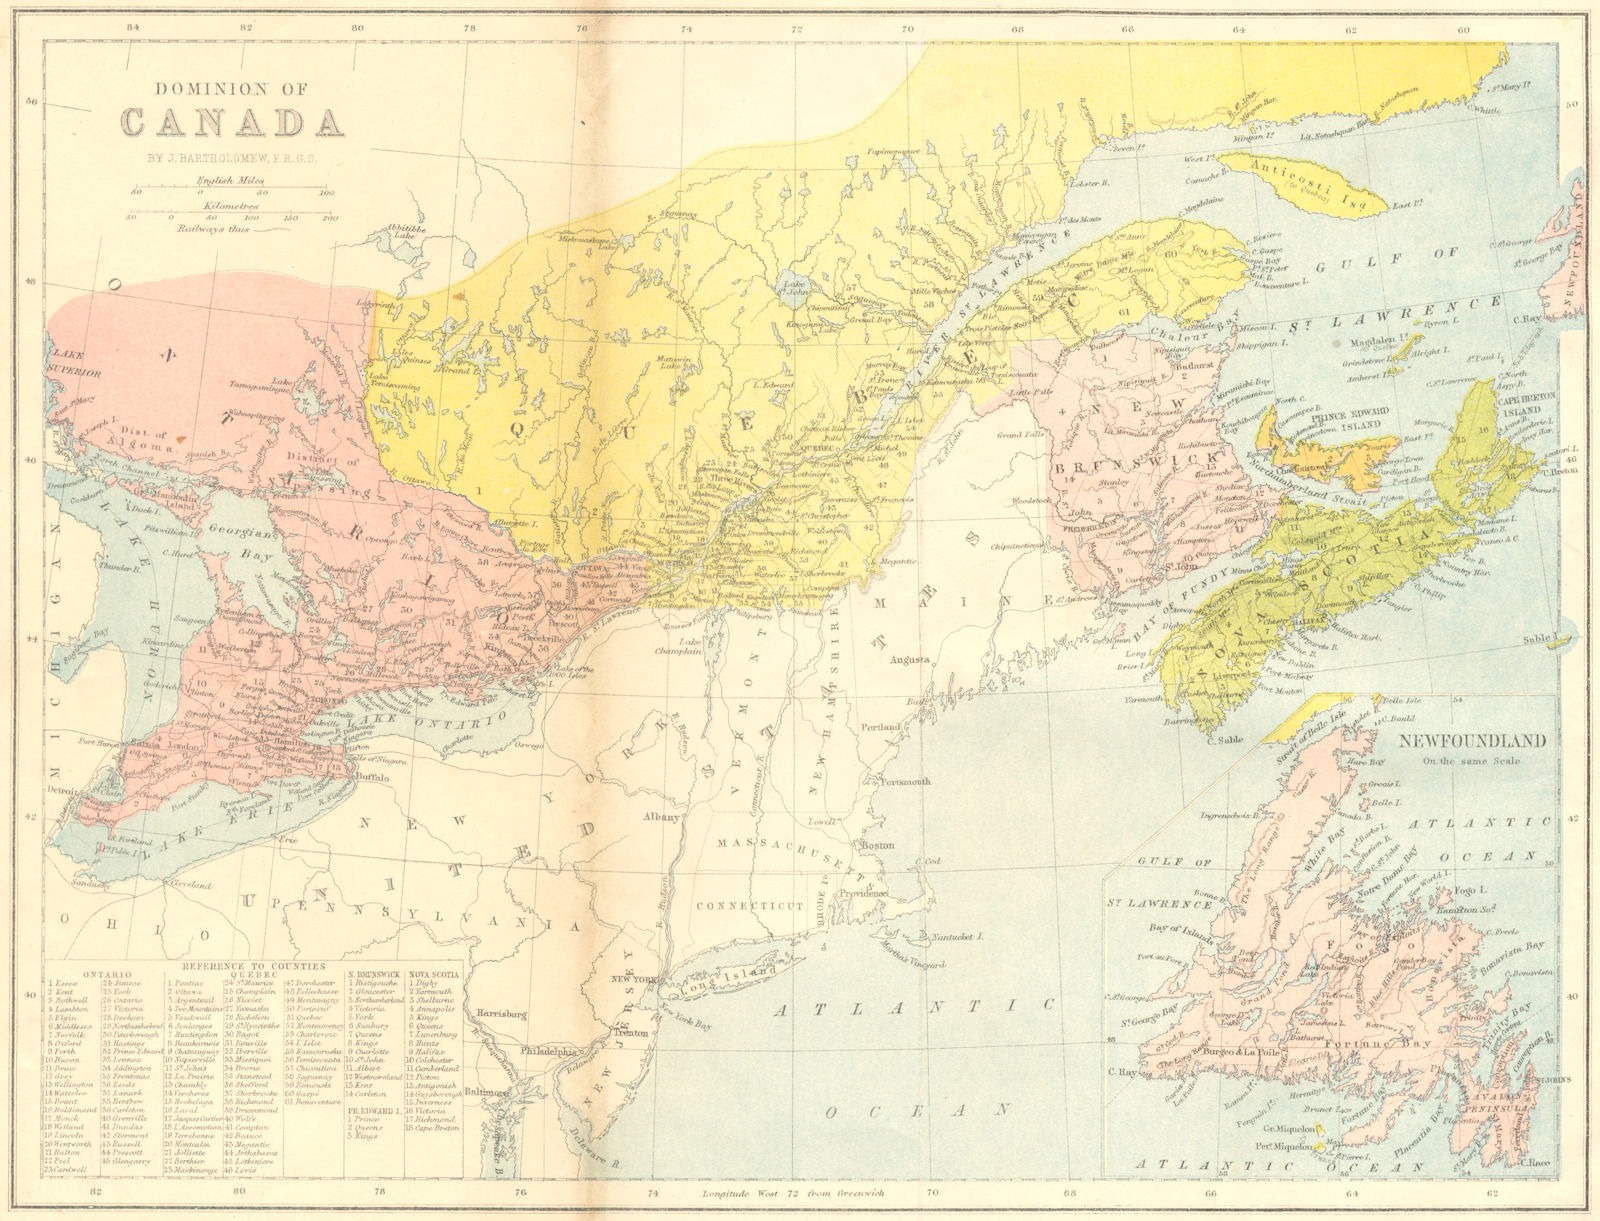 CANADA. Dominion of 1870 old antique vintage map plan chart